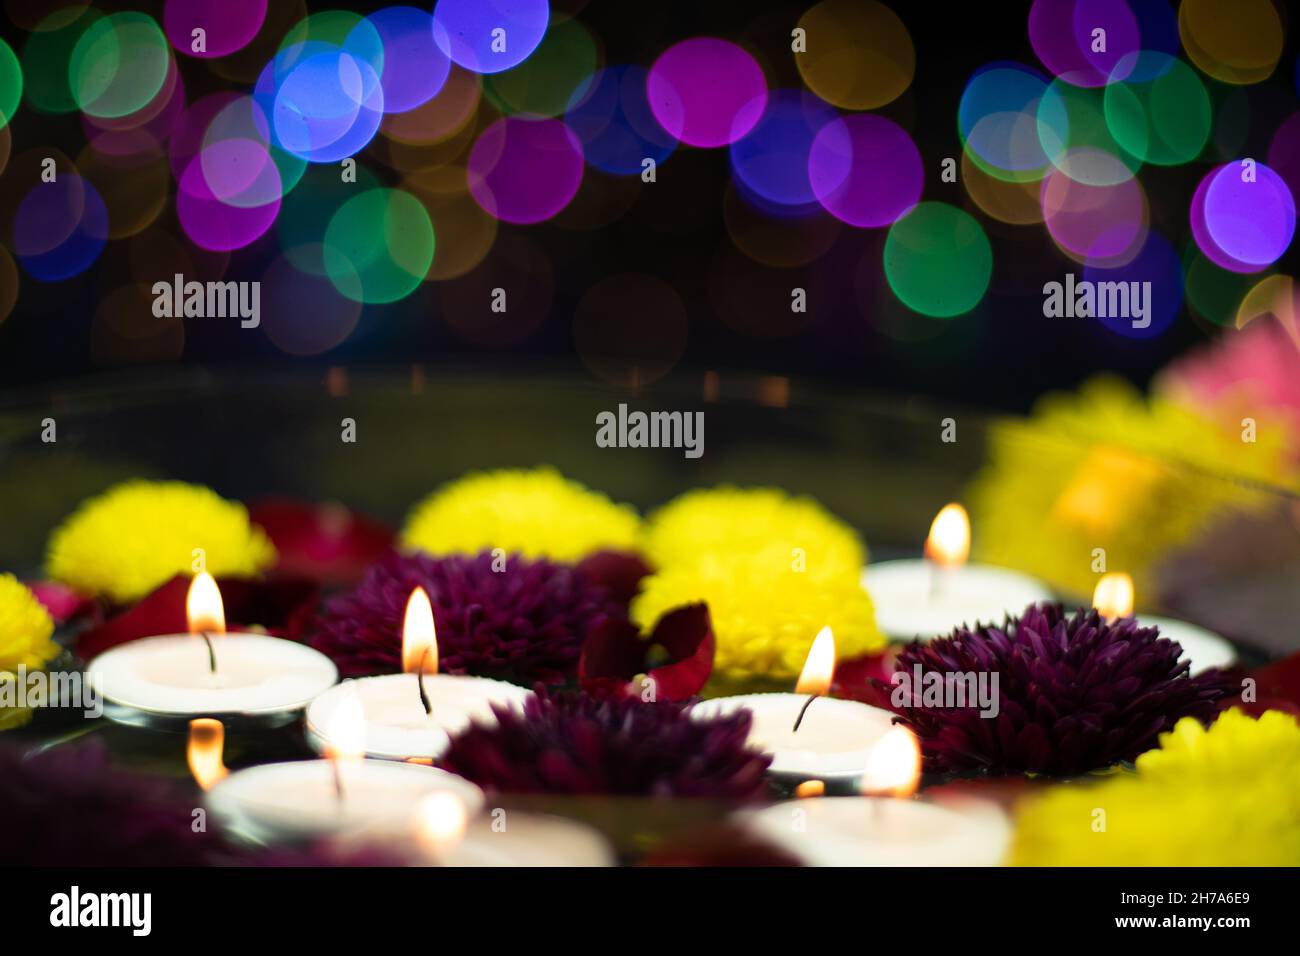 Floating Tealight Candles Illuminated Surrounded By Fresh Multi Colored Maroon And Yellow Flowers. Colorful Bokeh On Dark Background. Theme For Shubh Stock Photo